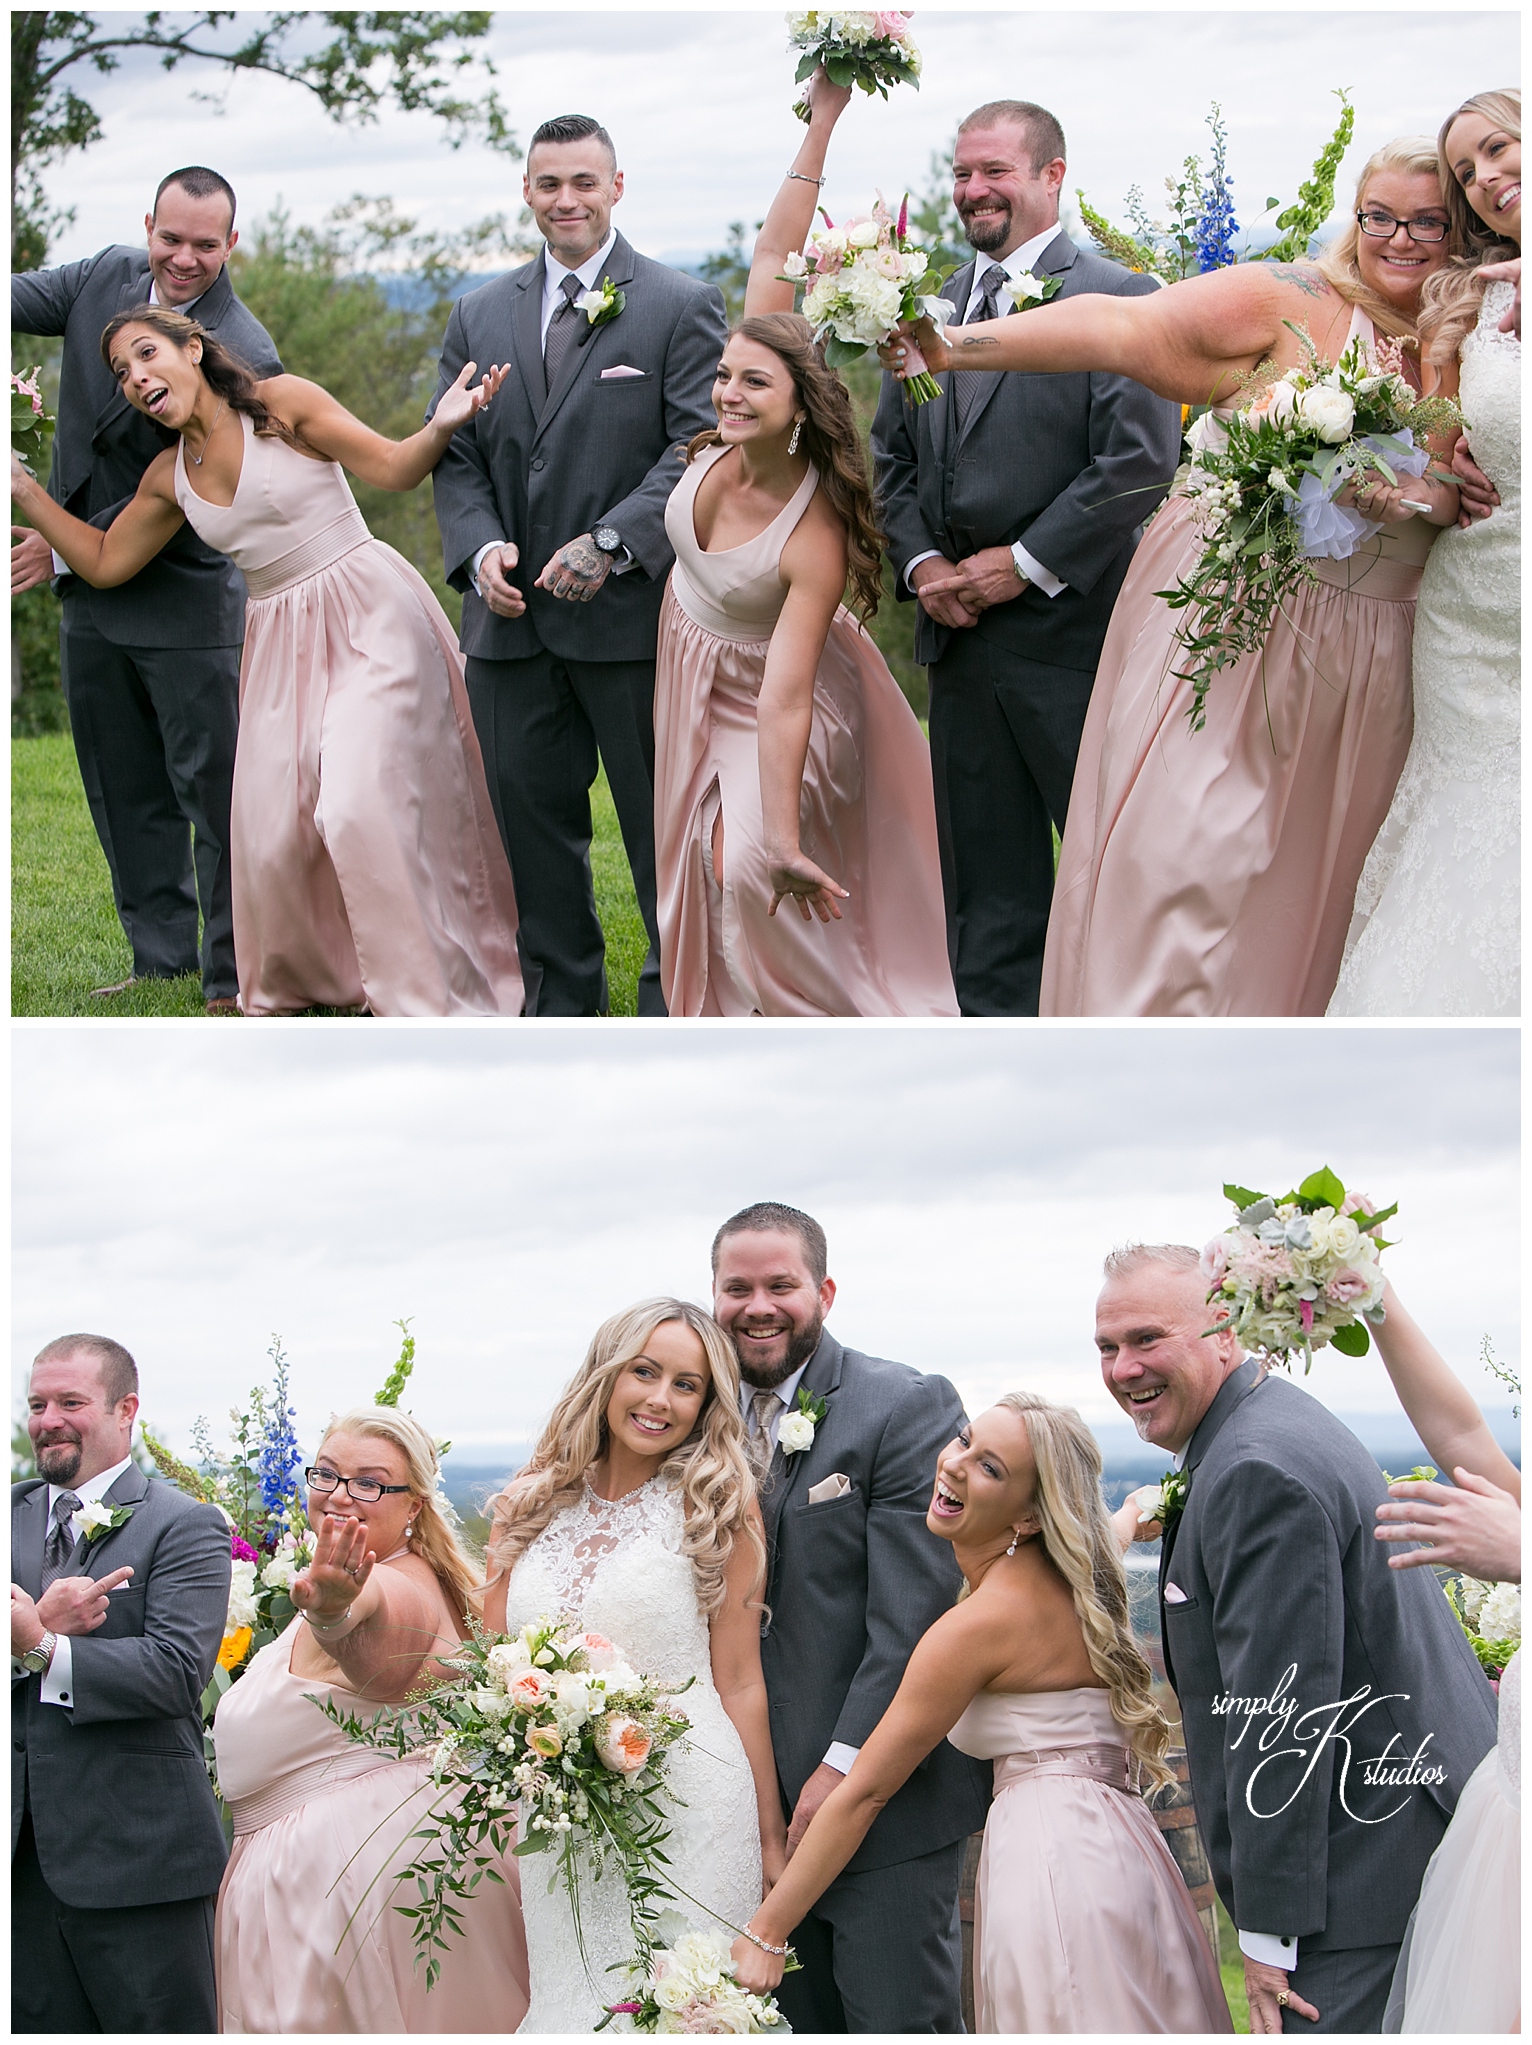 Candid Wedding Photography in CT.jpg